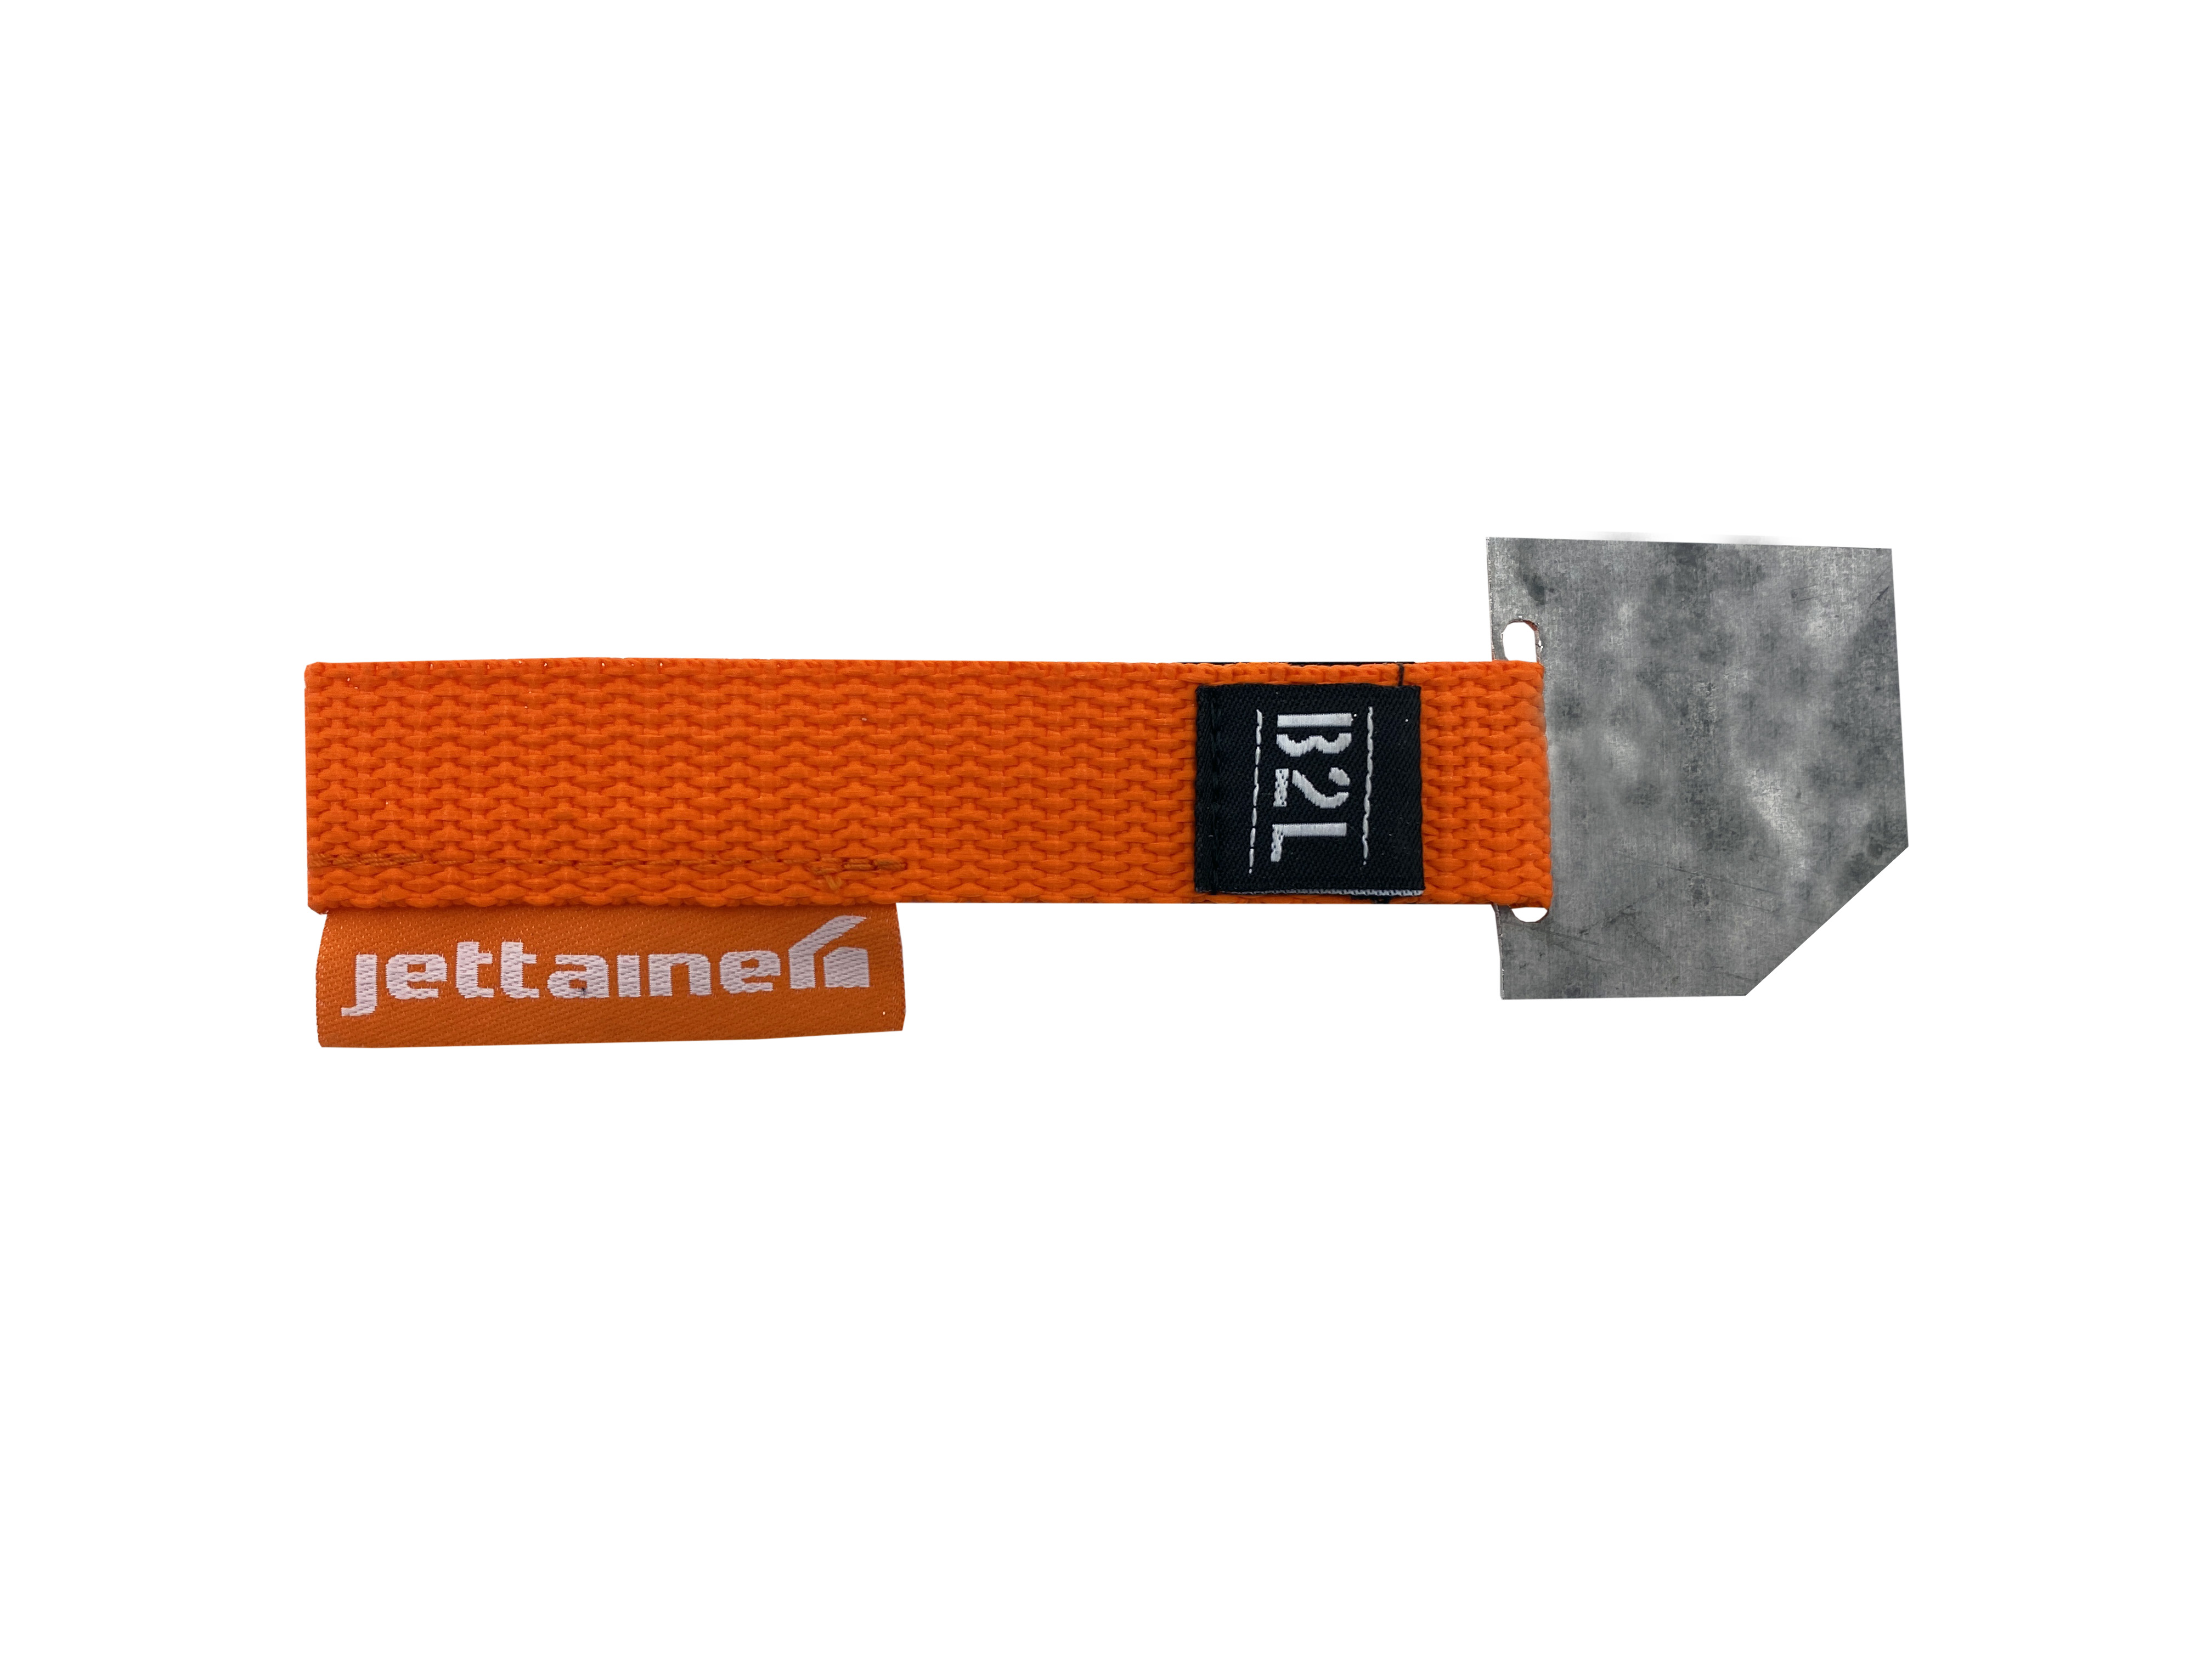 Jettainer Luggage Tag